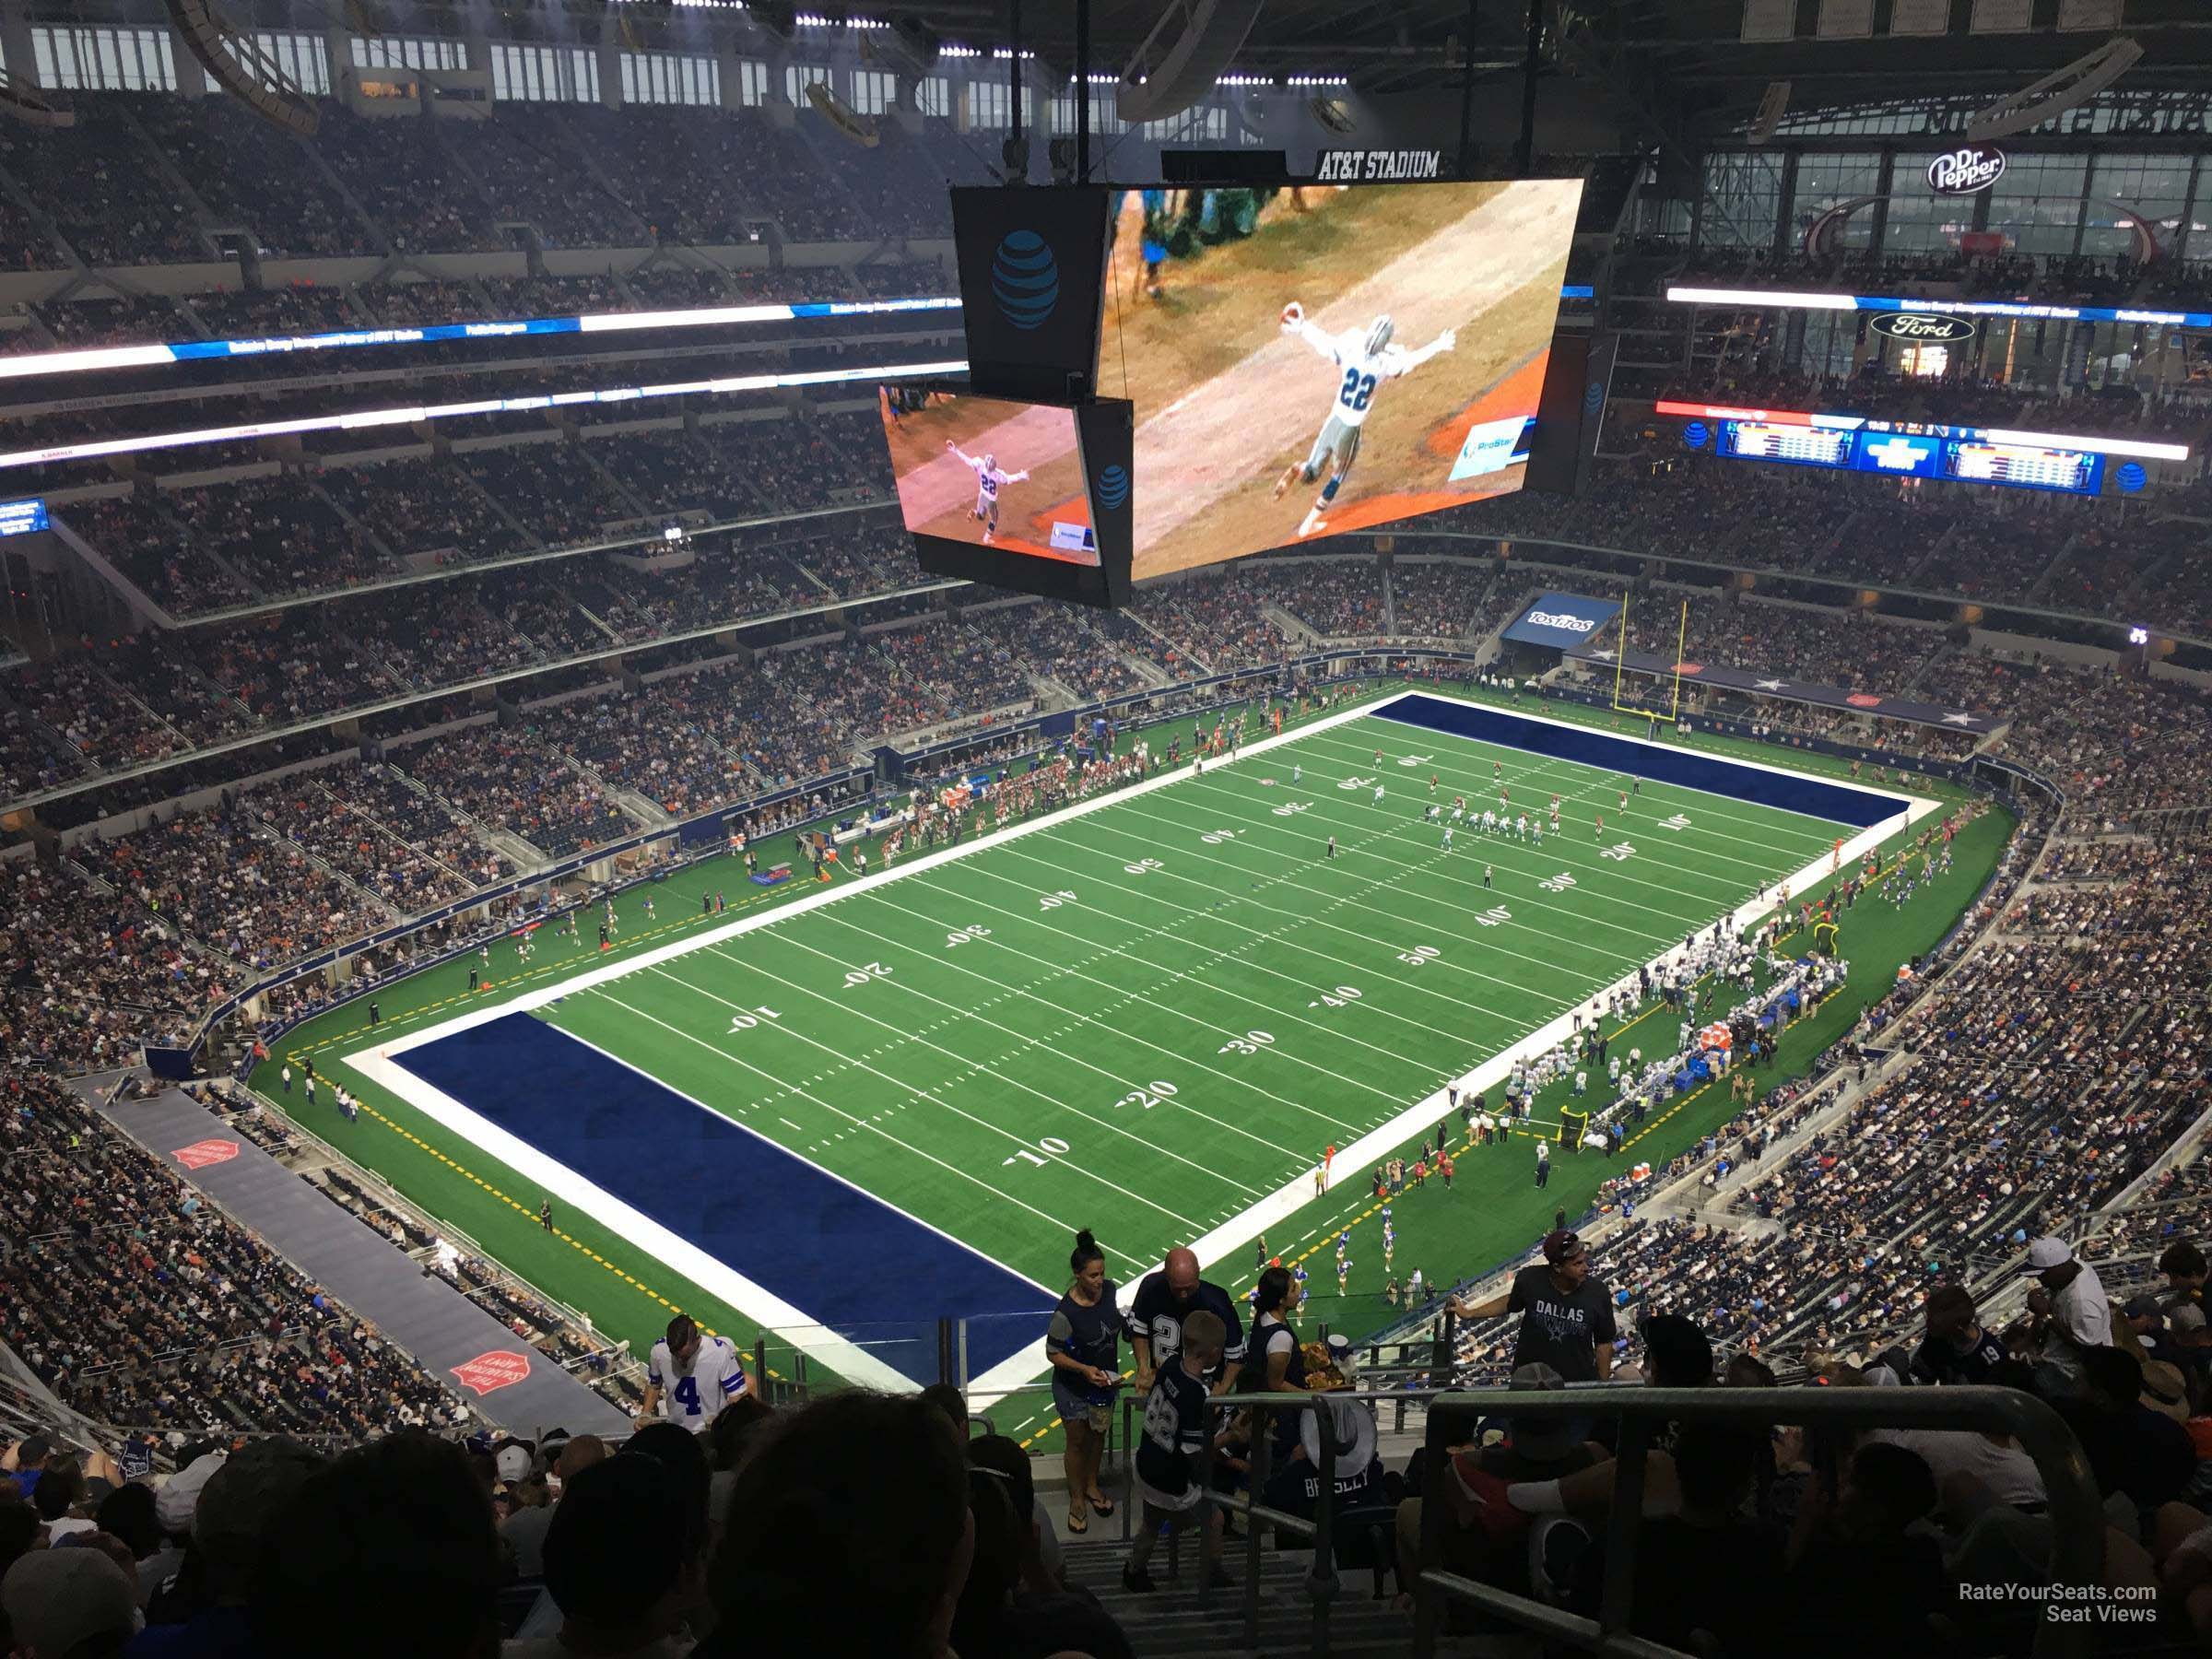 section 422, row 22 seat view  for football - at&t stadium (cowboys stadium)